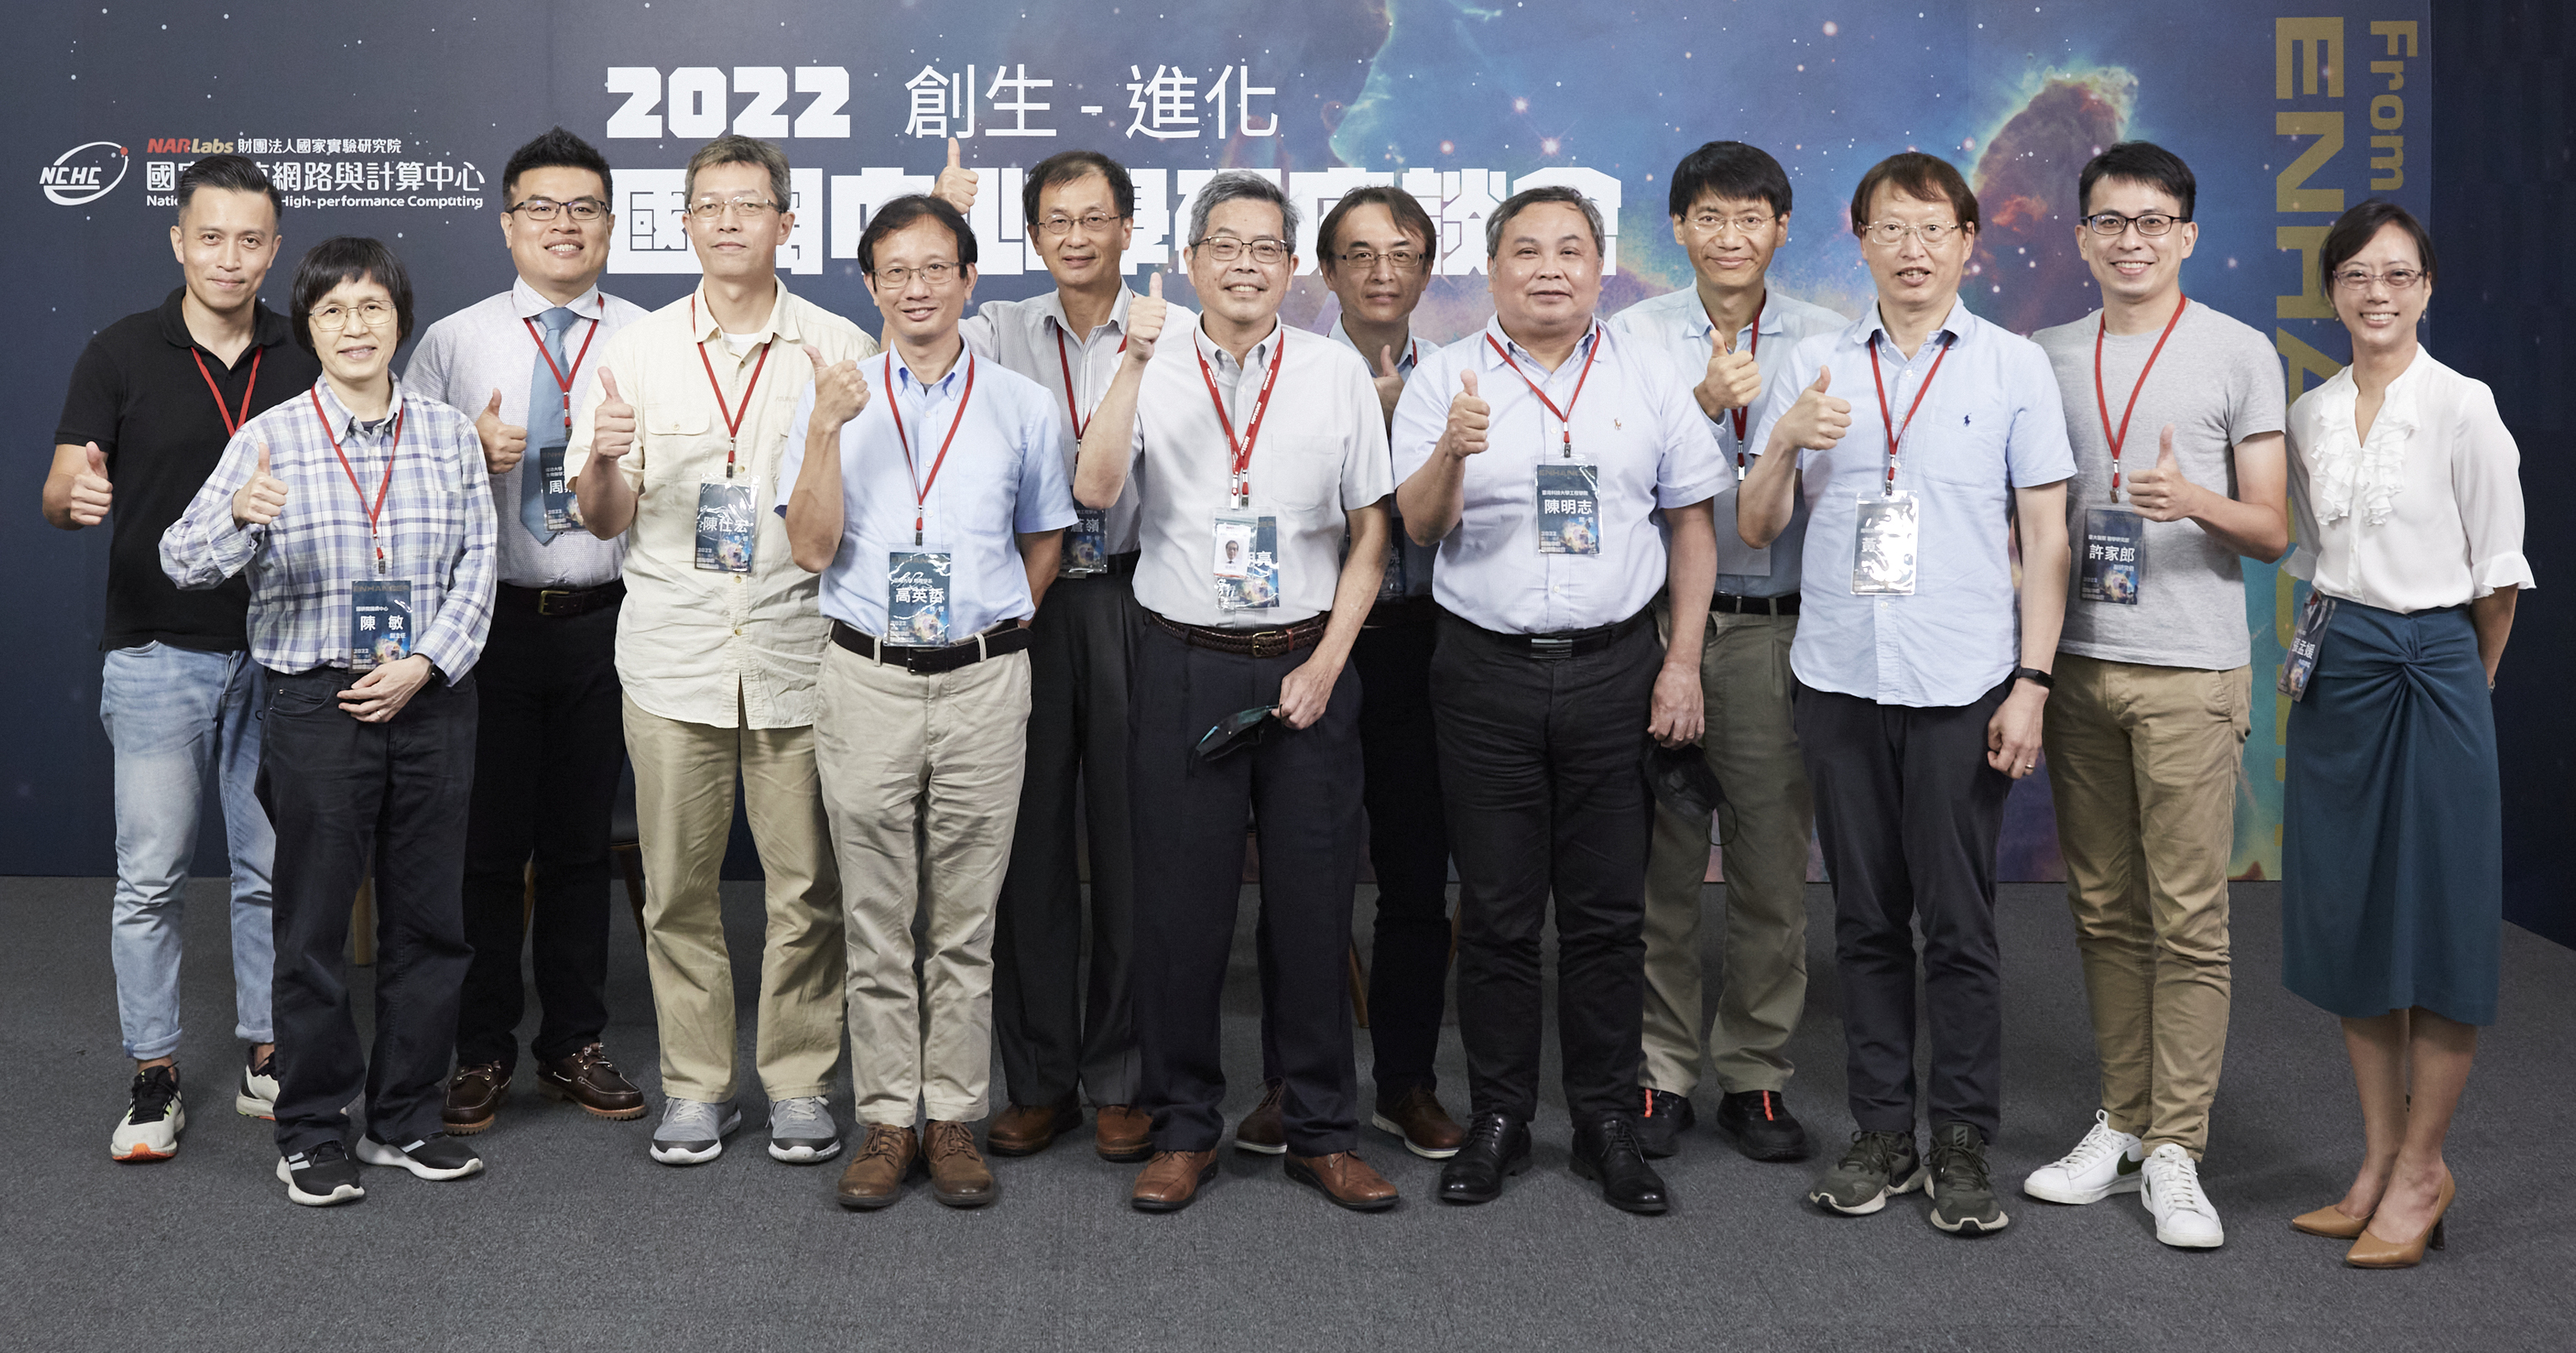 National Center for High-performance Computing invited scholars from different academic and research fields in Taiwan to participate in the “2022 From Enabler to Enhancer National Center for High-performance Computing Symposium.”